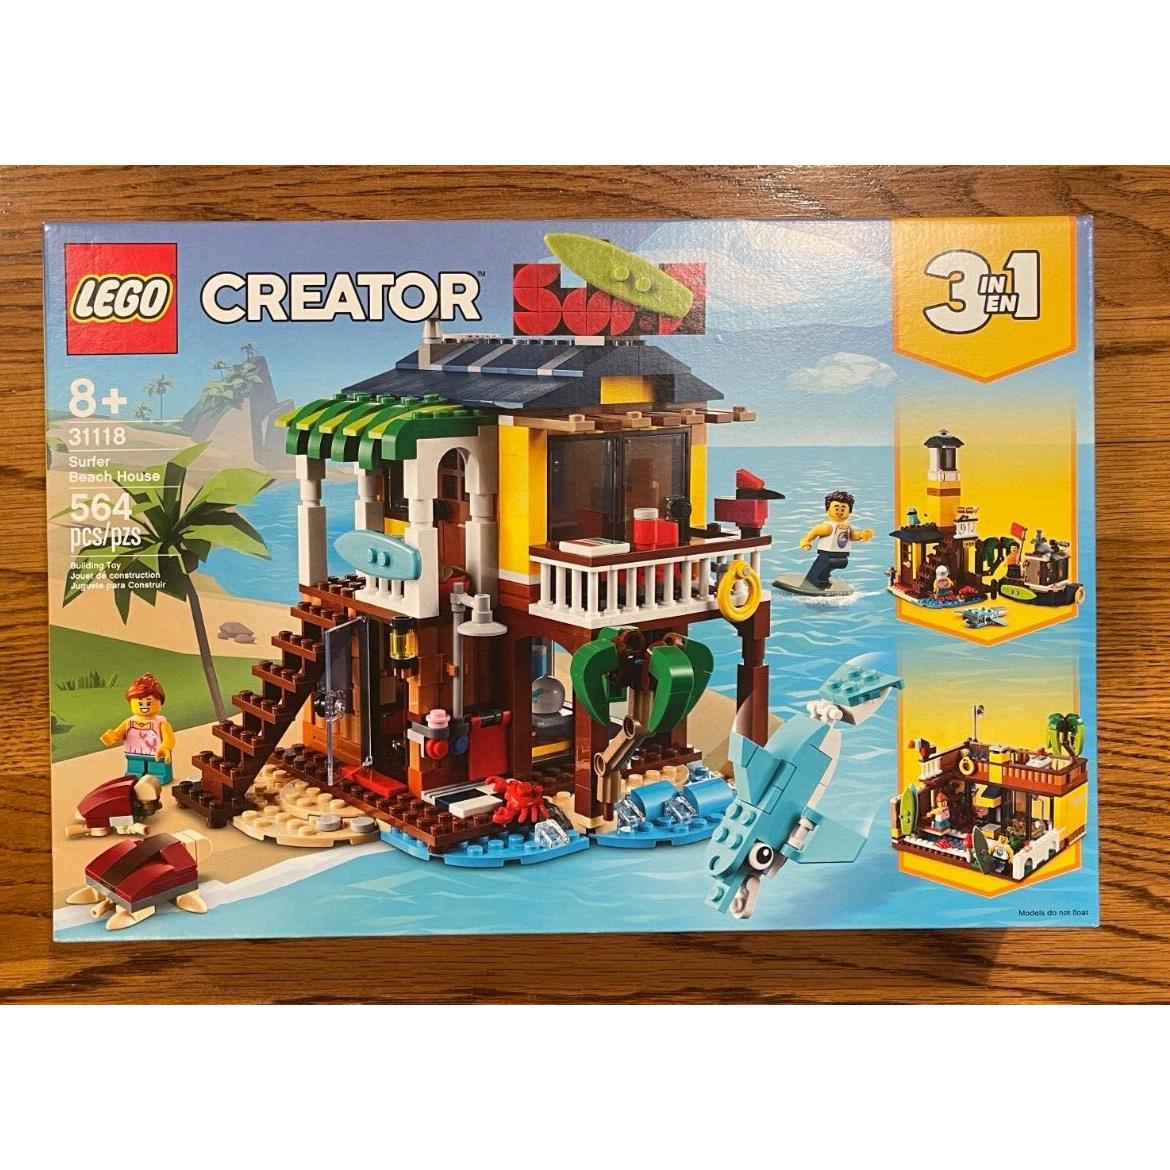 Lego Creator 3 in 1 Surfer Beach House Set 31118 Condition